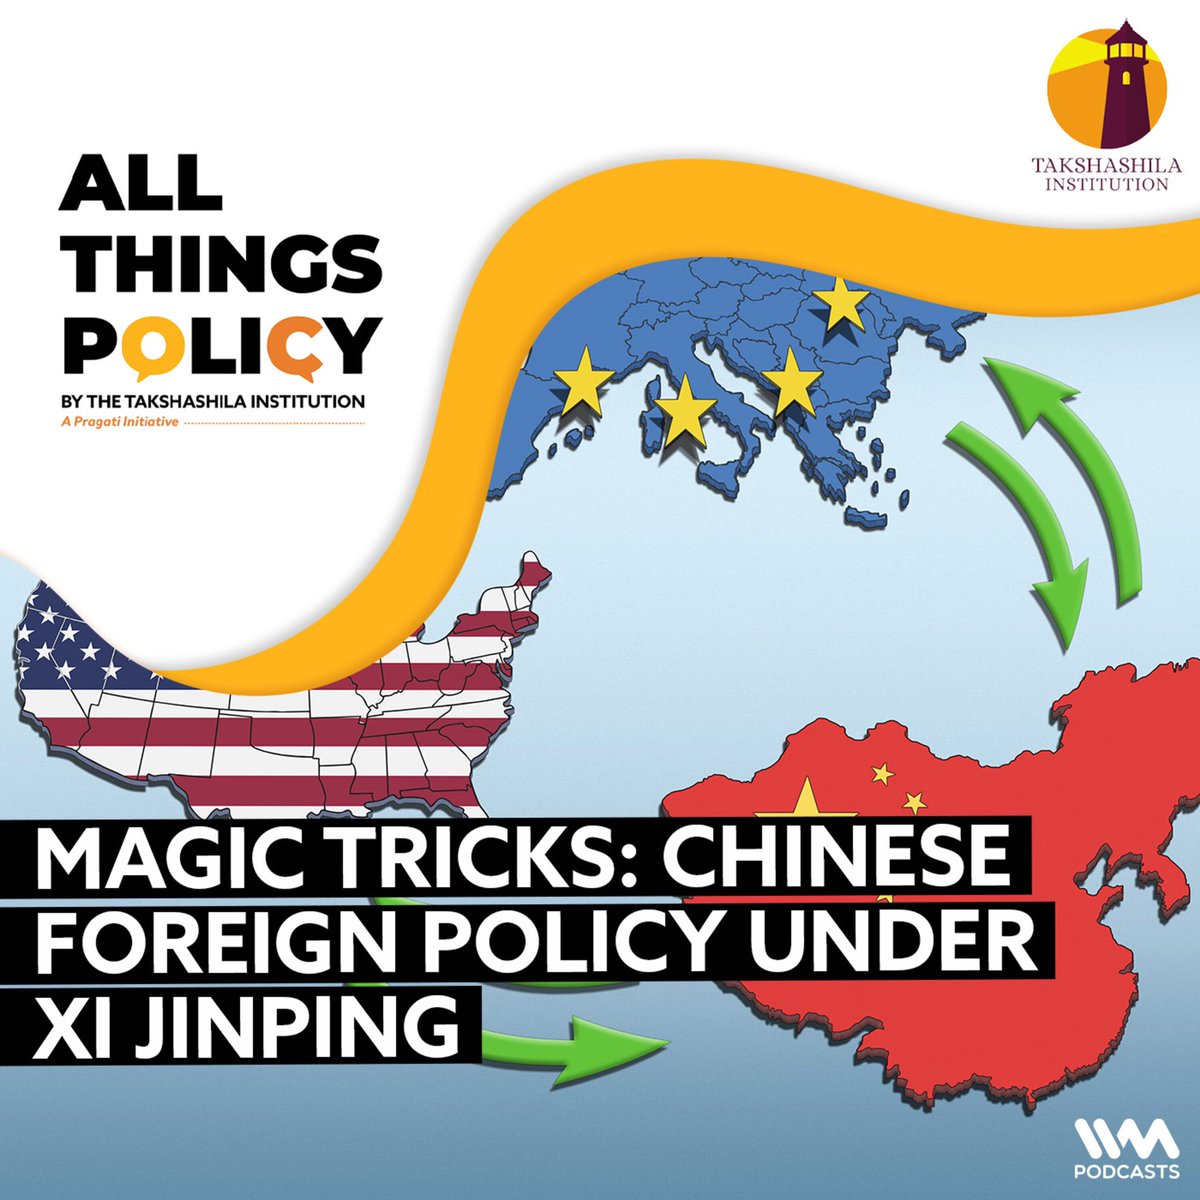 In this episode of All Things Policy, @SaxenaAnushka_ interviews @Bkerrychina on the nature and drivers of Chinese Foreign Policy under Xi Jinping. 🎧 shorturl.at/psDJ8 @IVMPodcasts